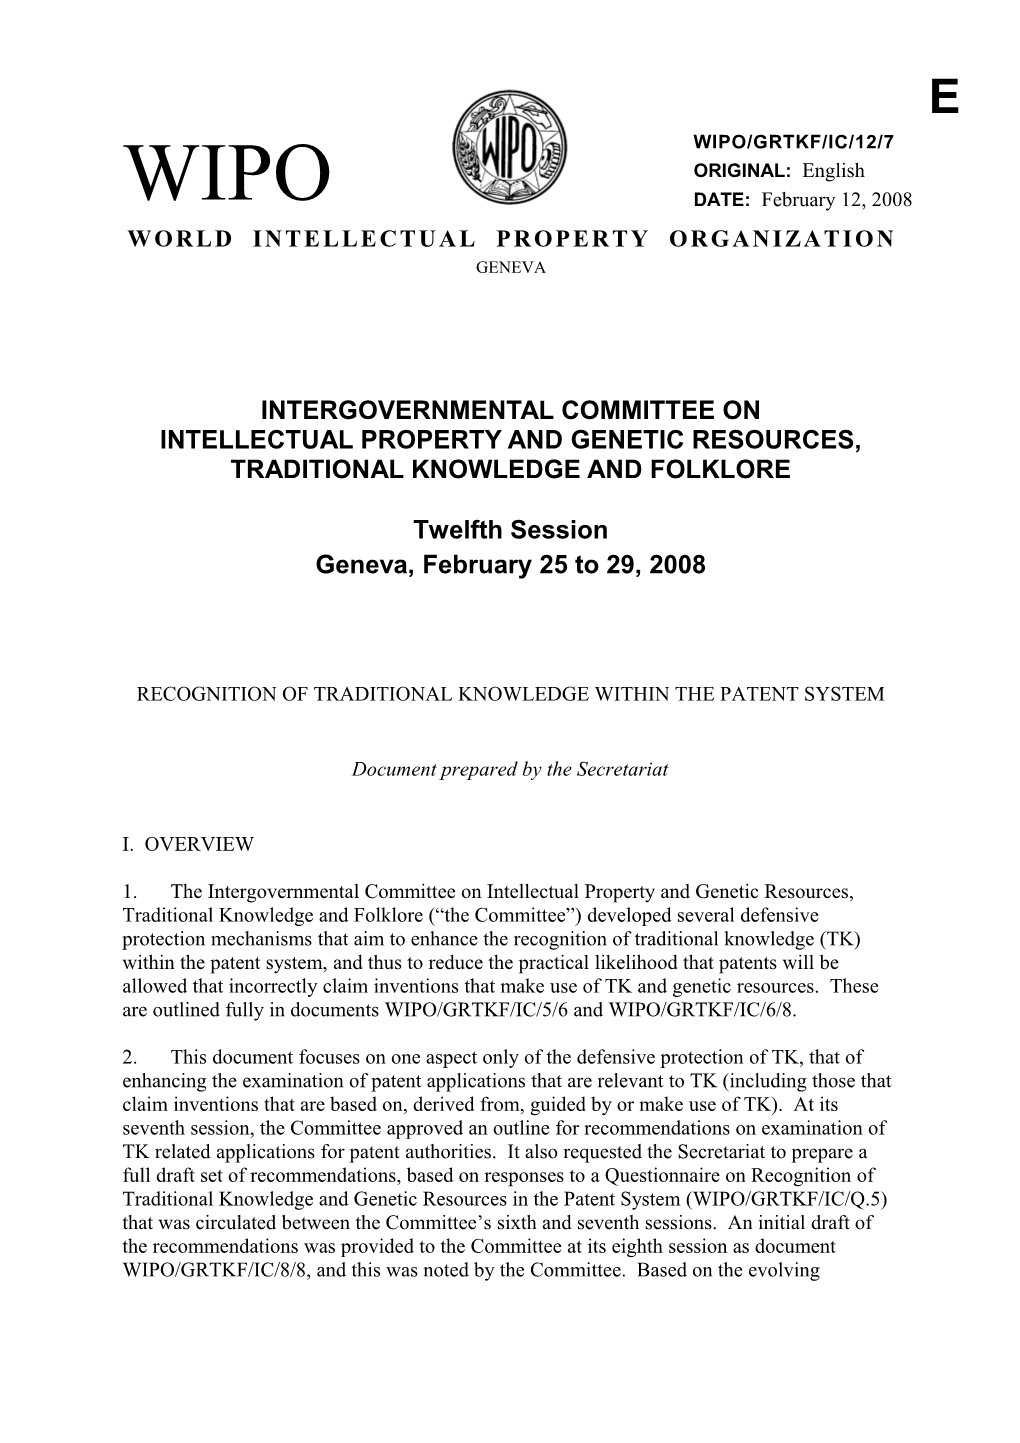 WIPO/GRTKF/IC/11/7: Recognition of Traditional Knowledge Within the Patent System